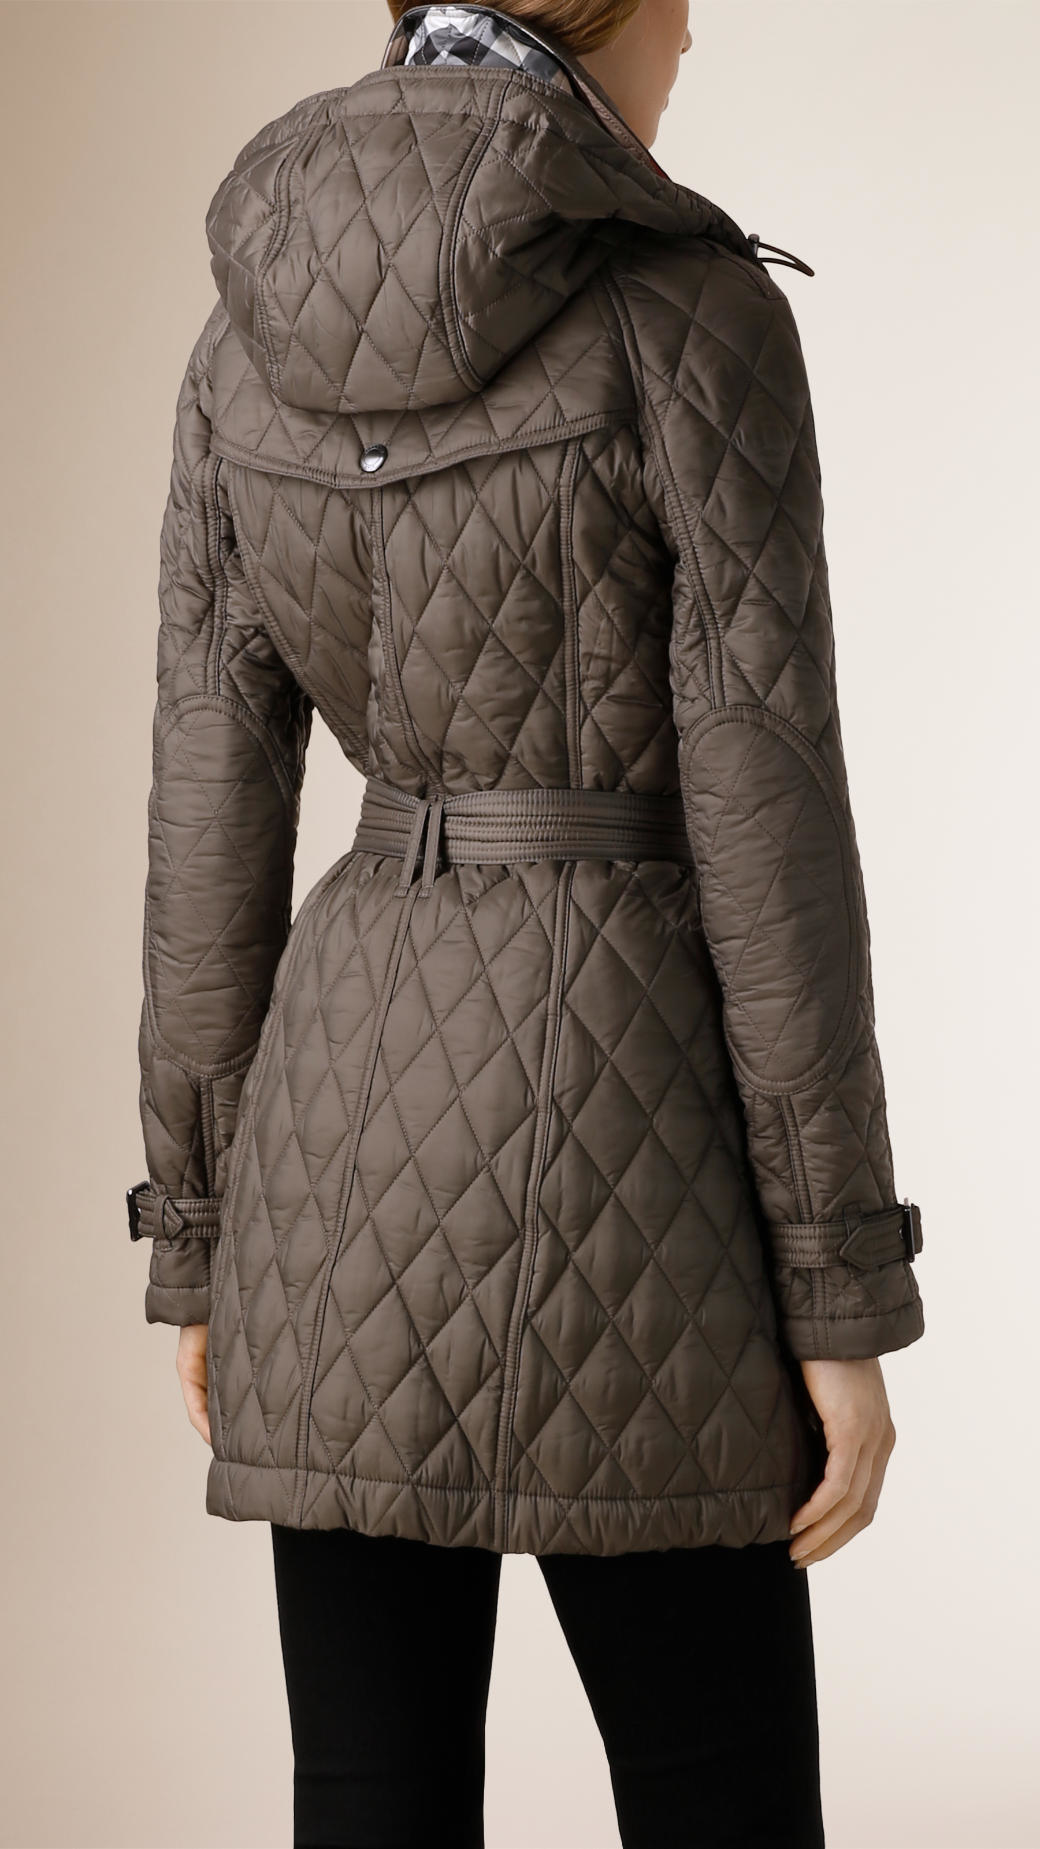 Burberry Diamond Quilted Coat in Gray - Lyst